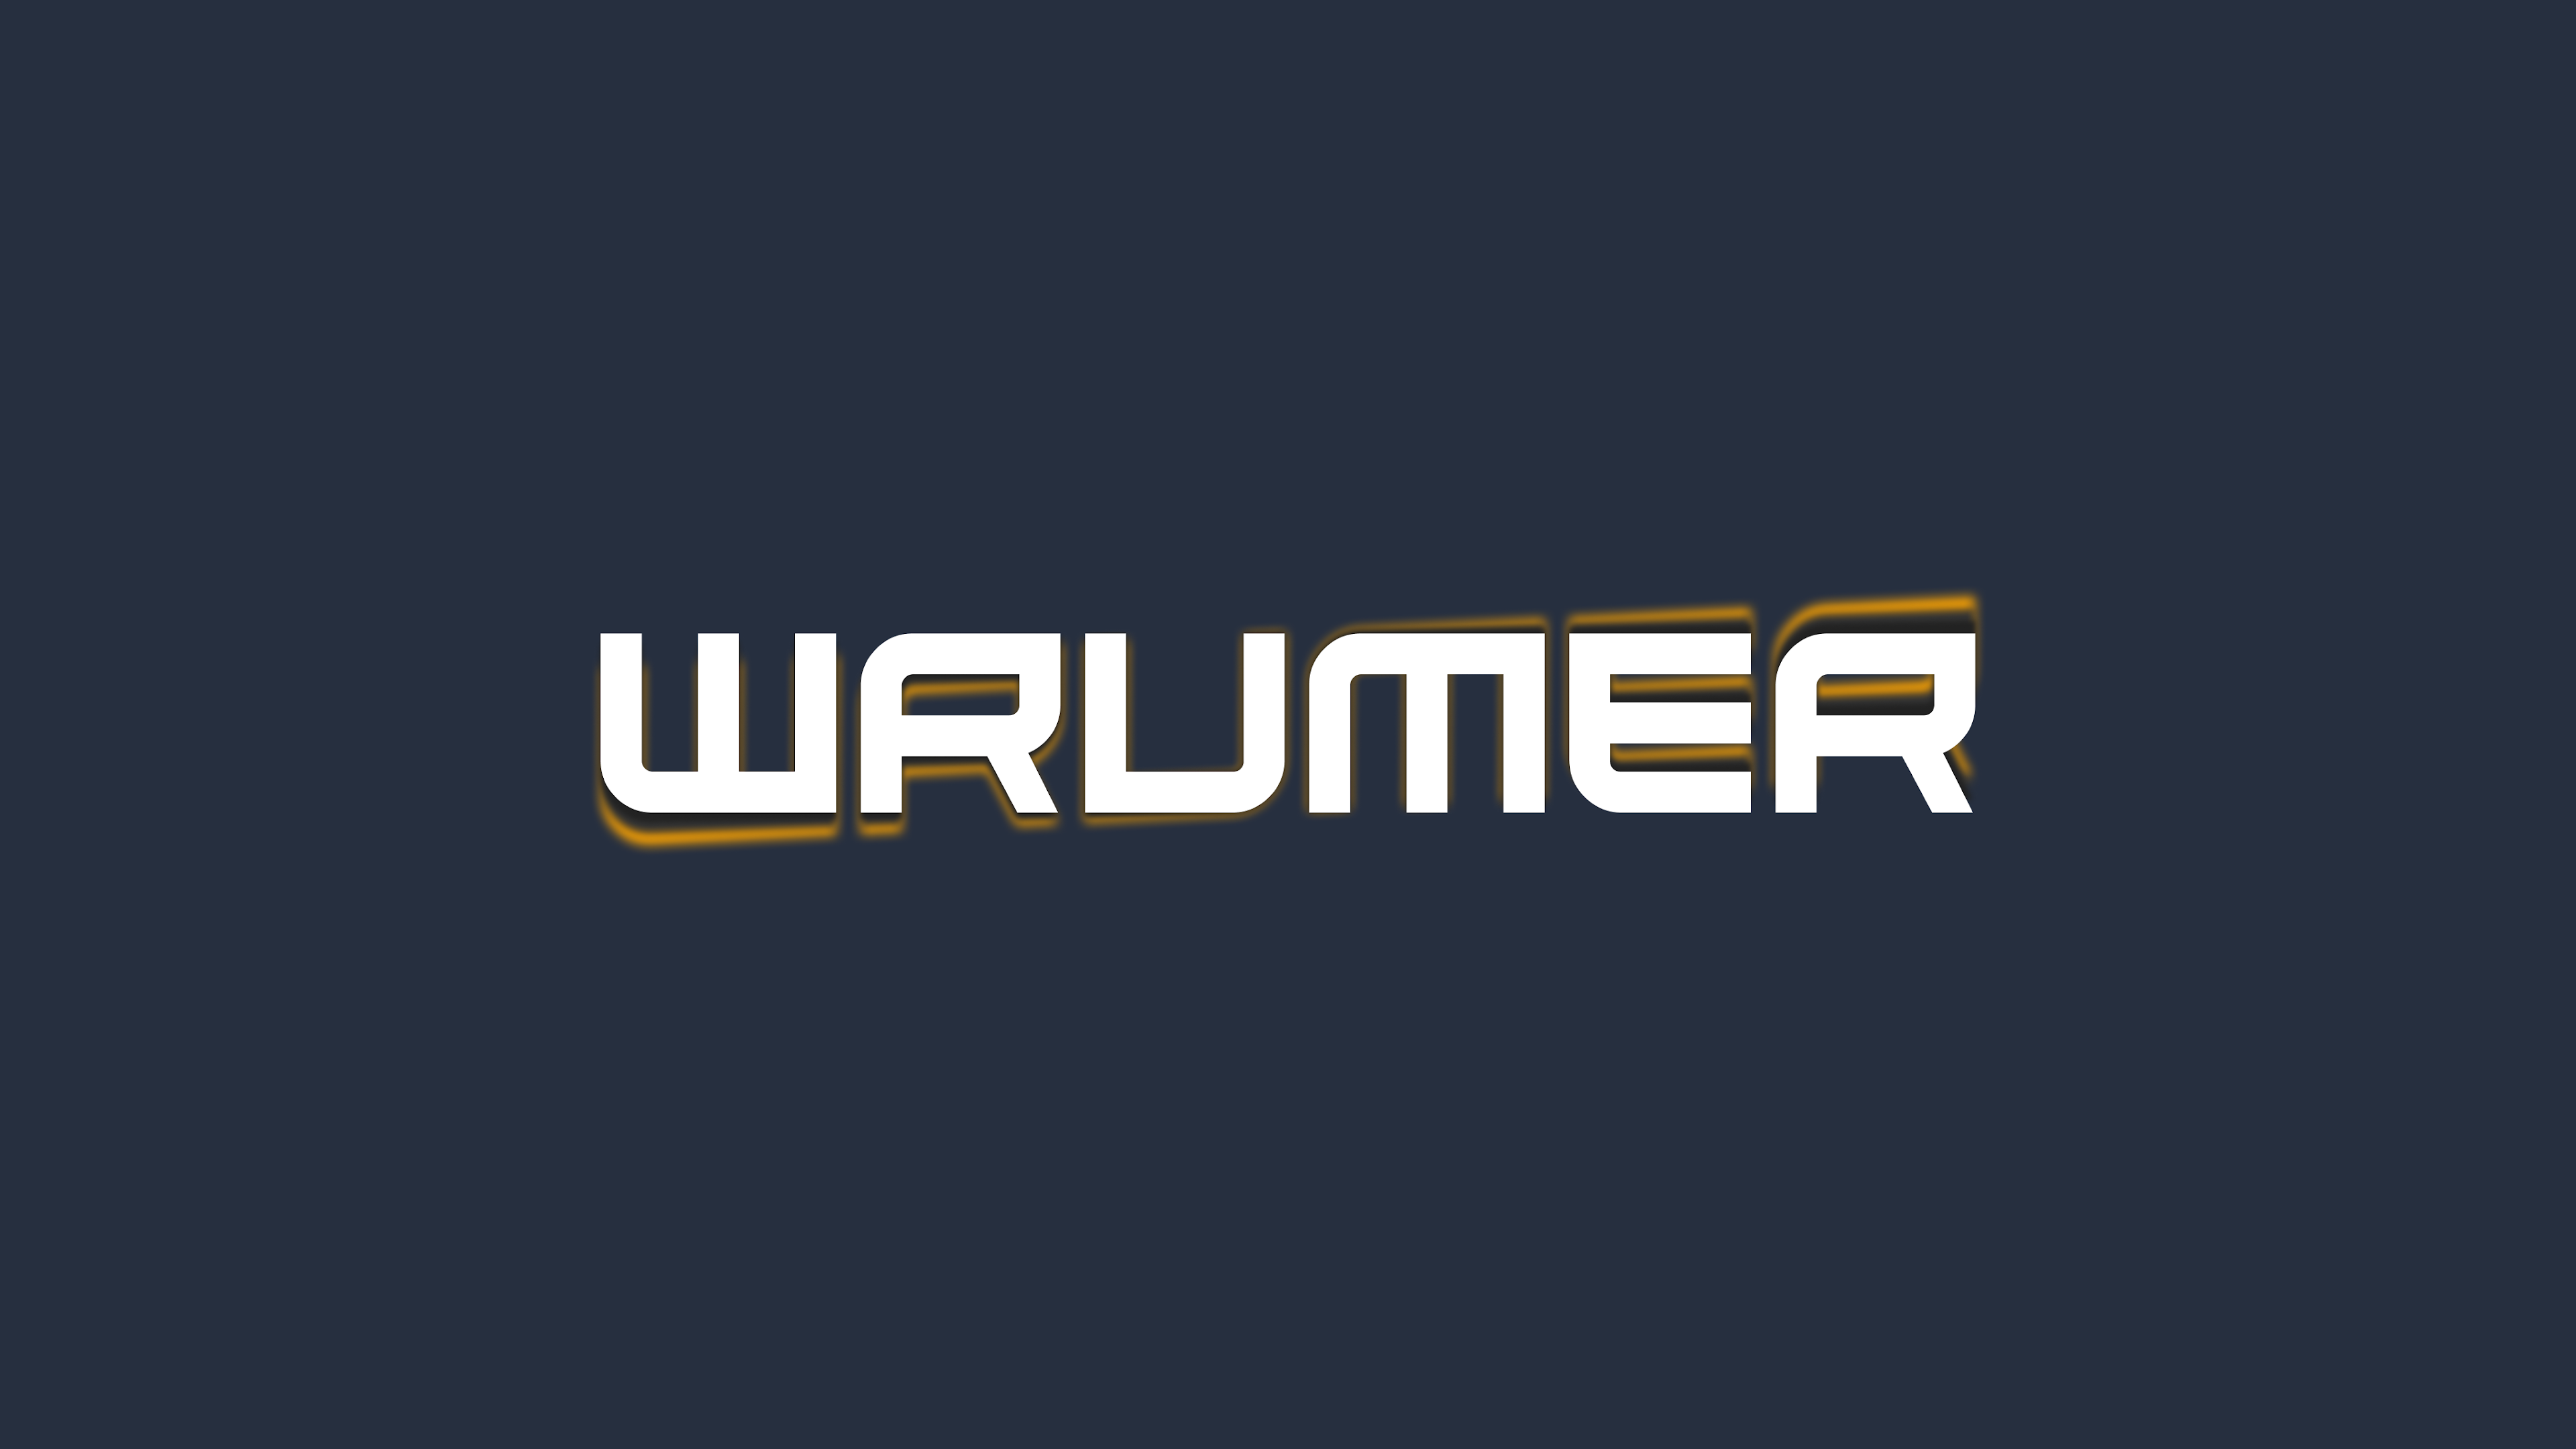 Preview of Wrumer - Engine sounds through the car's speakers 